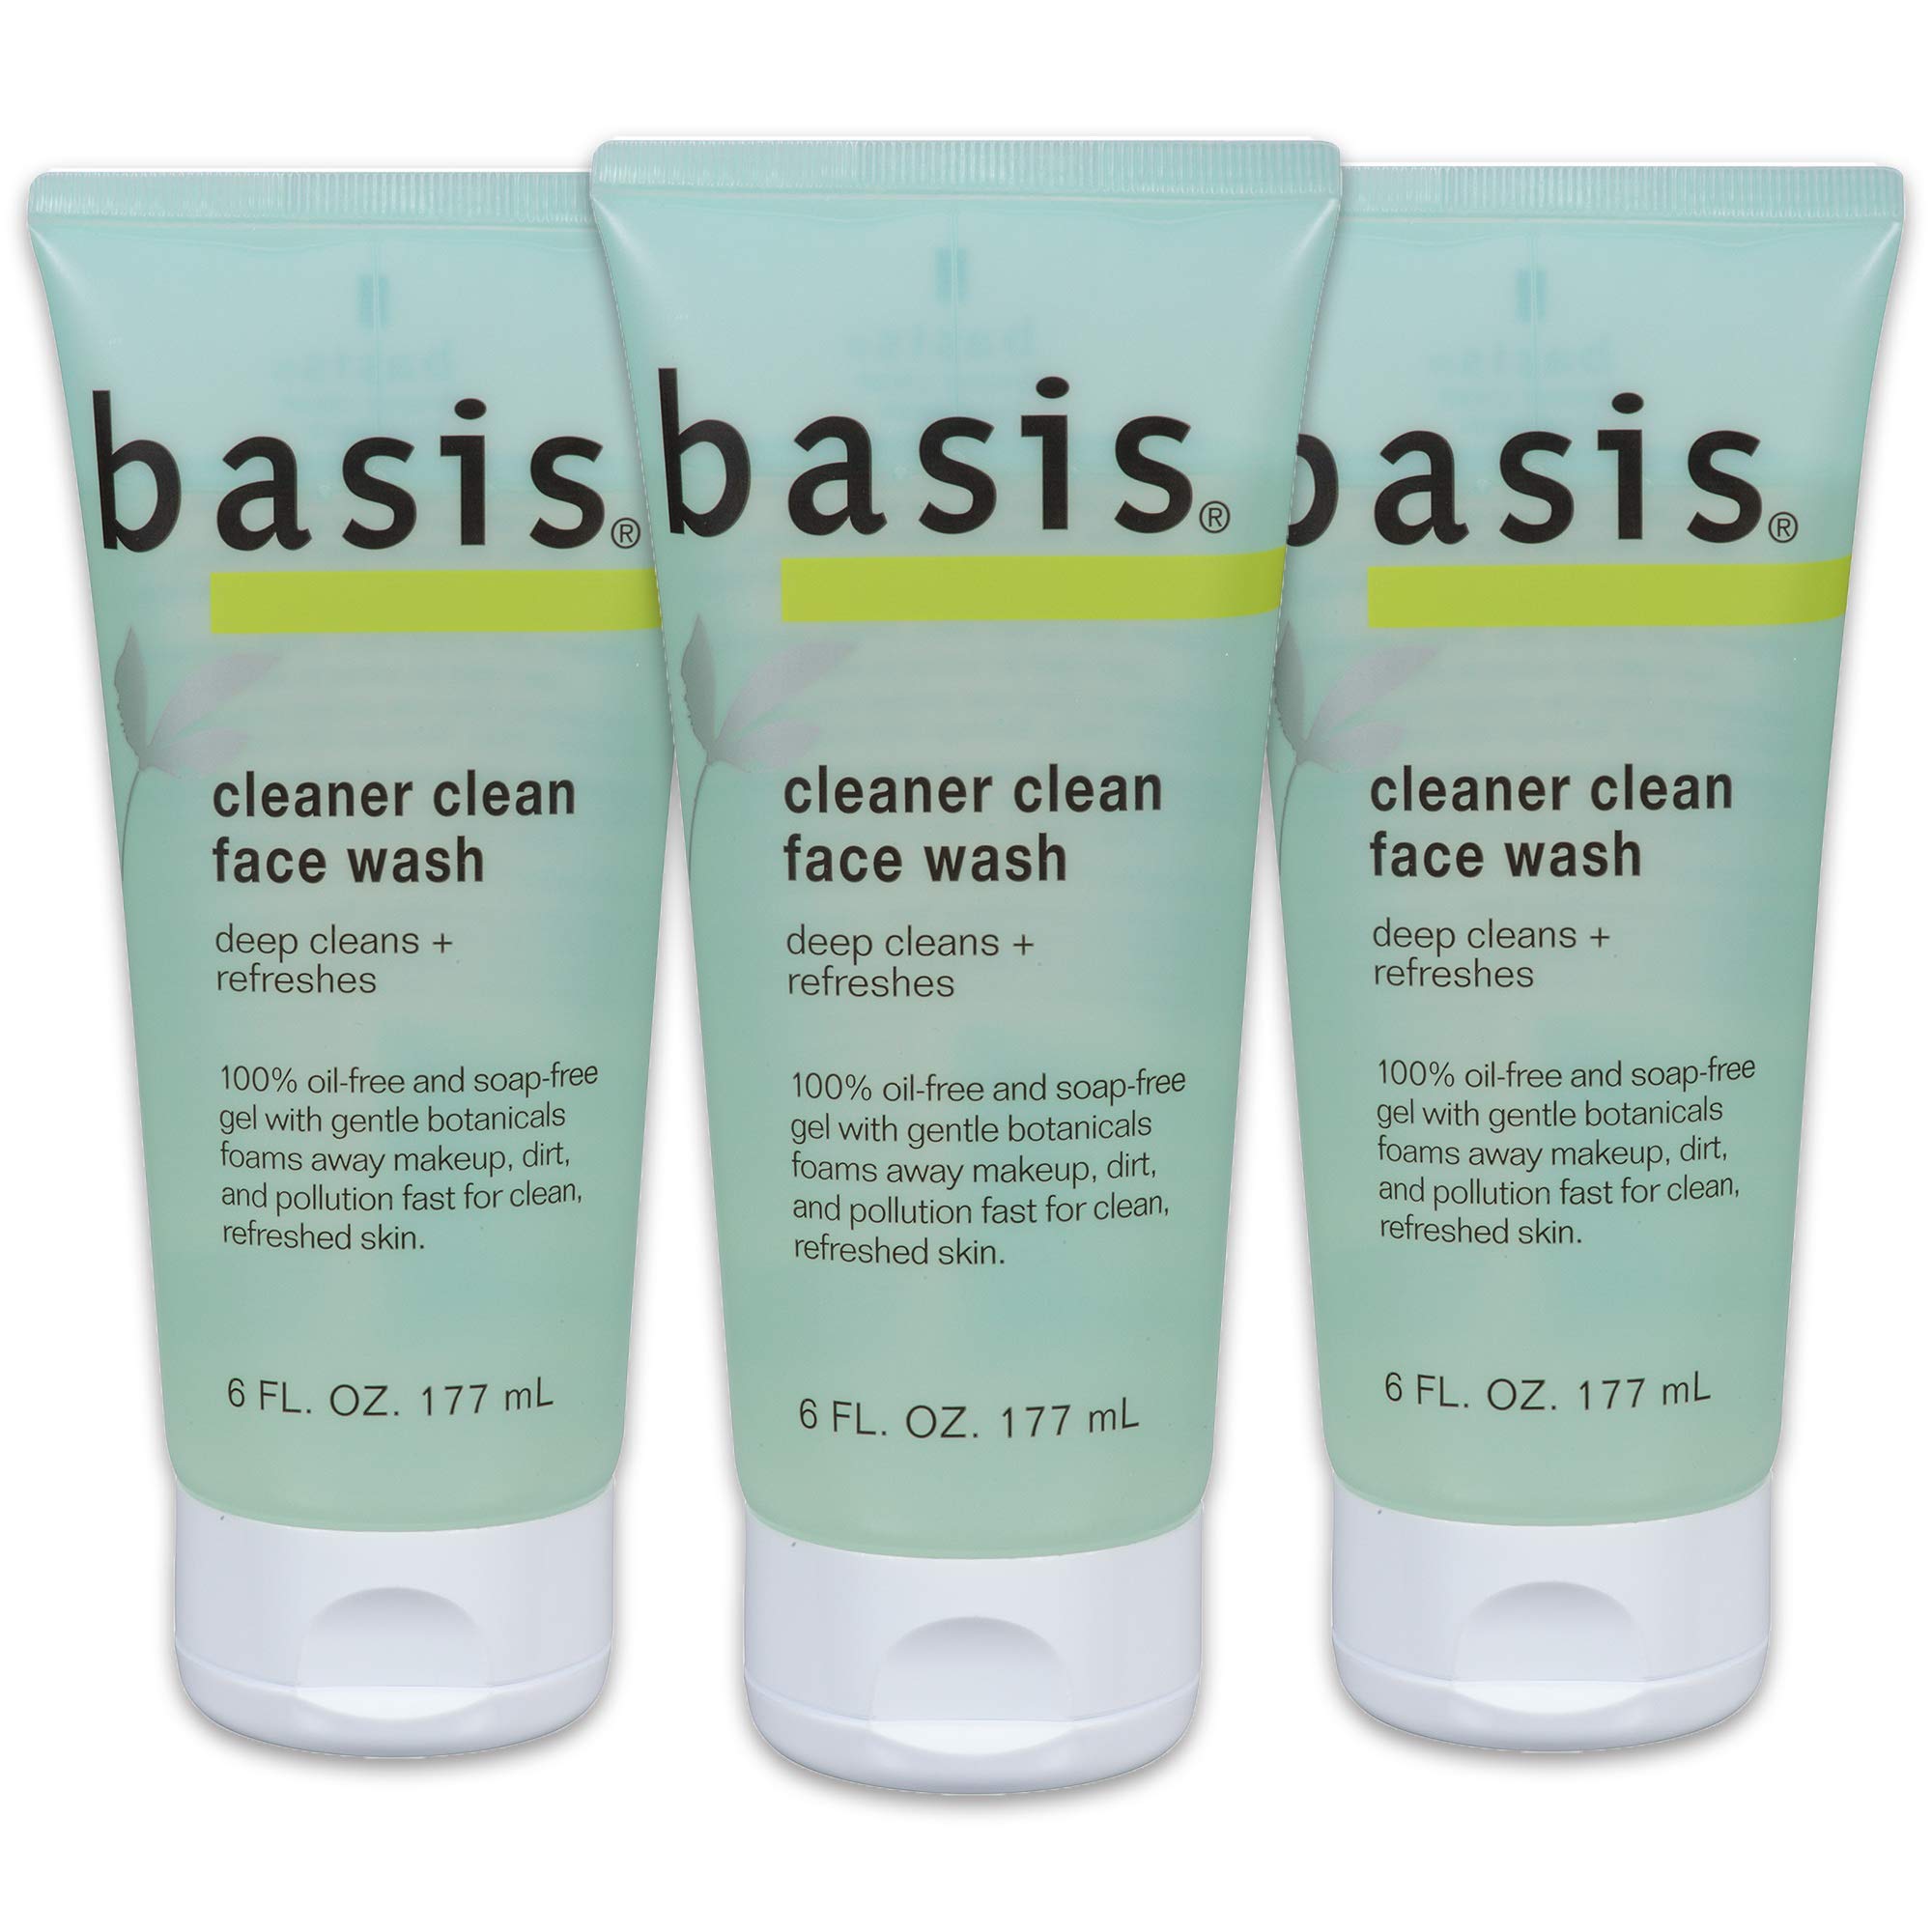 Basis Cleaner Clean Face Wash, 6 Ounce (Pack of 3) w/ 20% off coupon and S&S + Free Shipping w/ Prime or Orders $25+ - $6.94 w/15% S&S $7.41 w/5% S&S